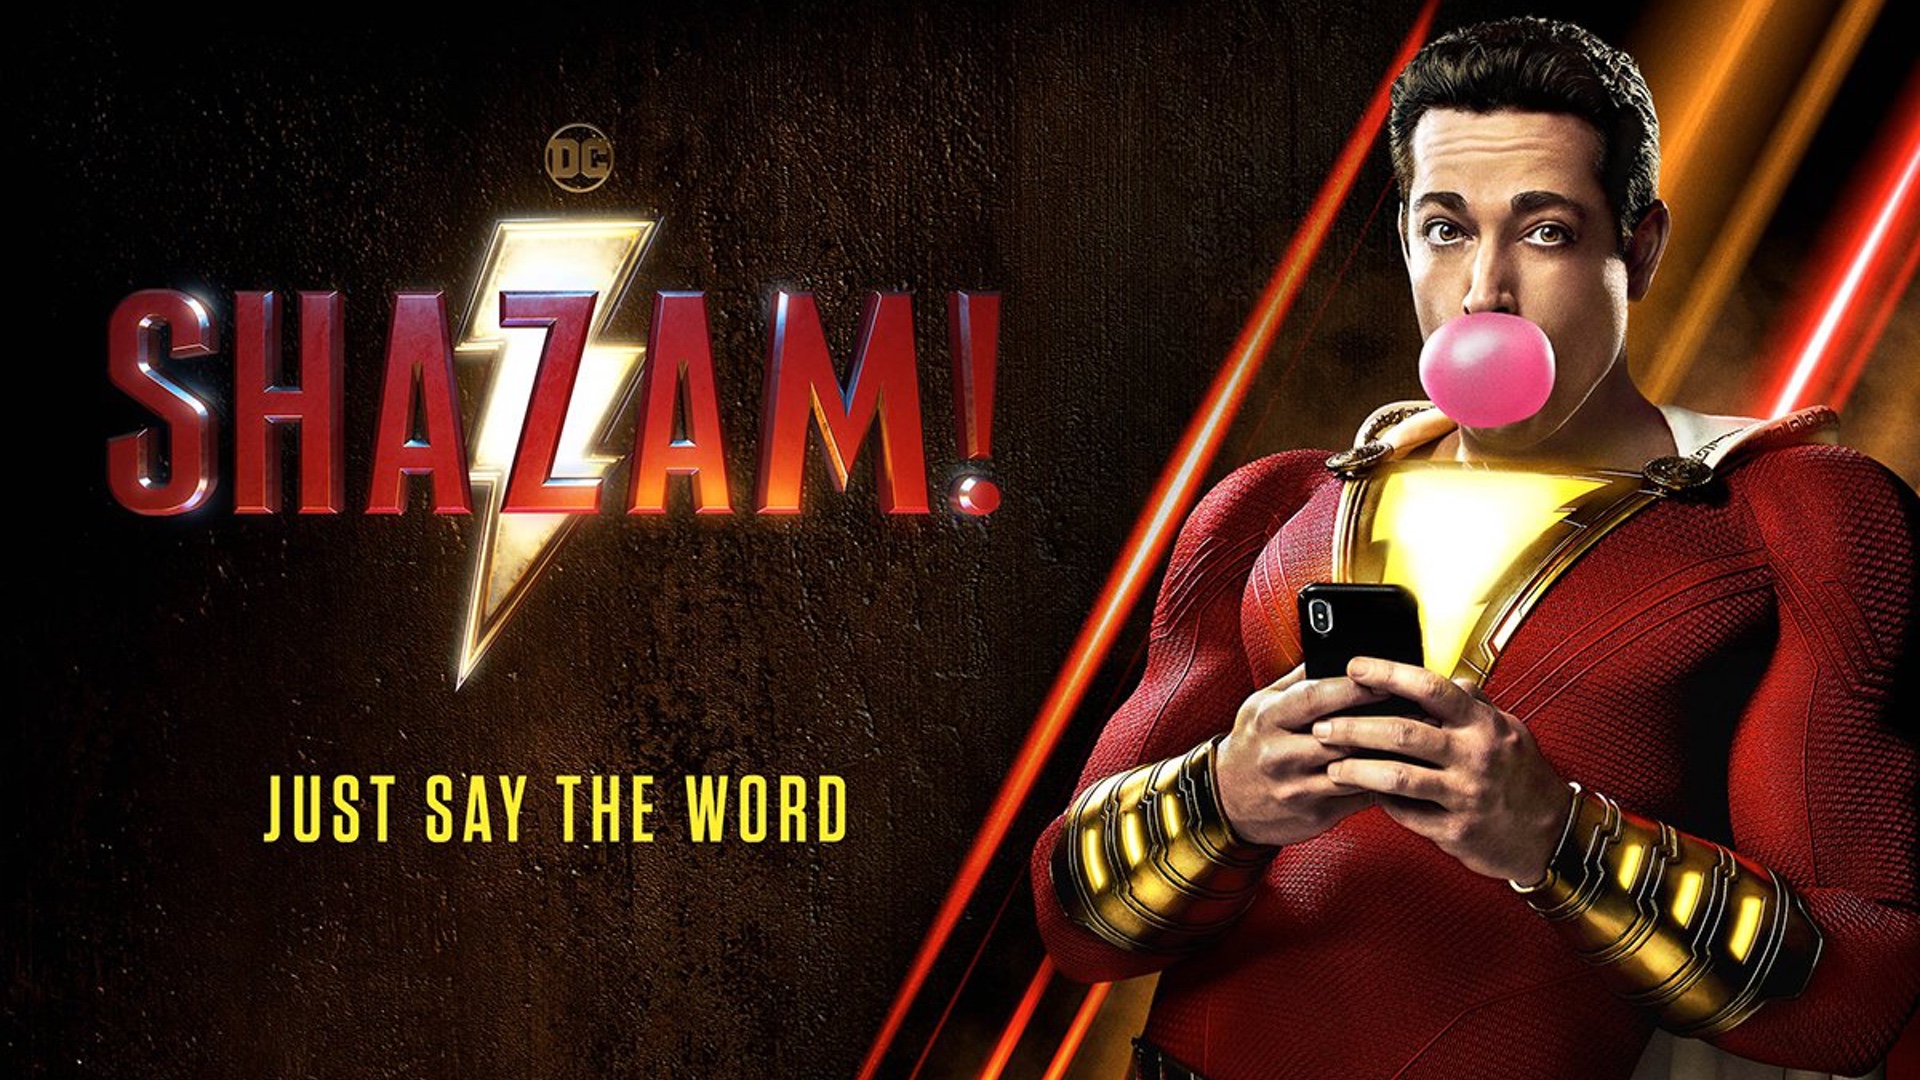 new-poster-for-shazam-asks-us-to-just-say-the-word-social